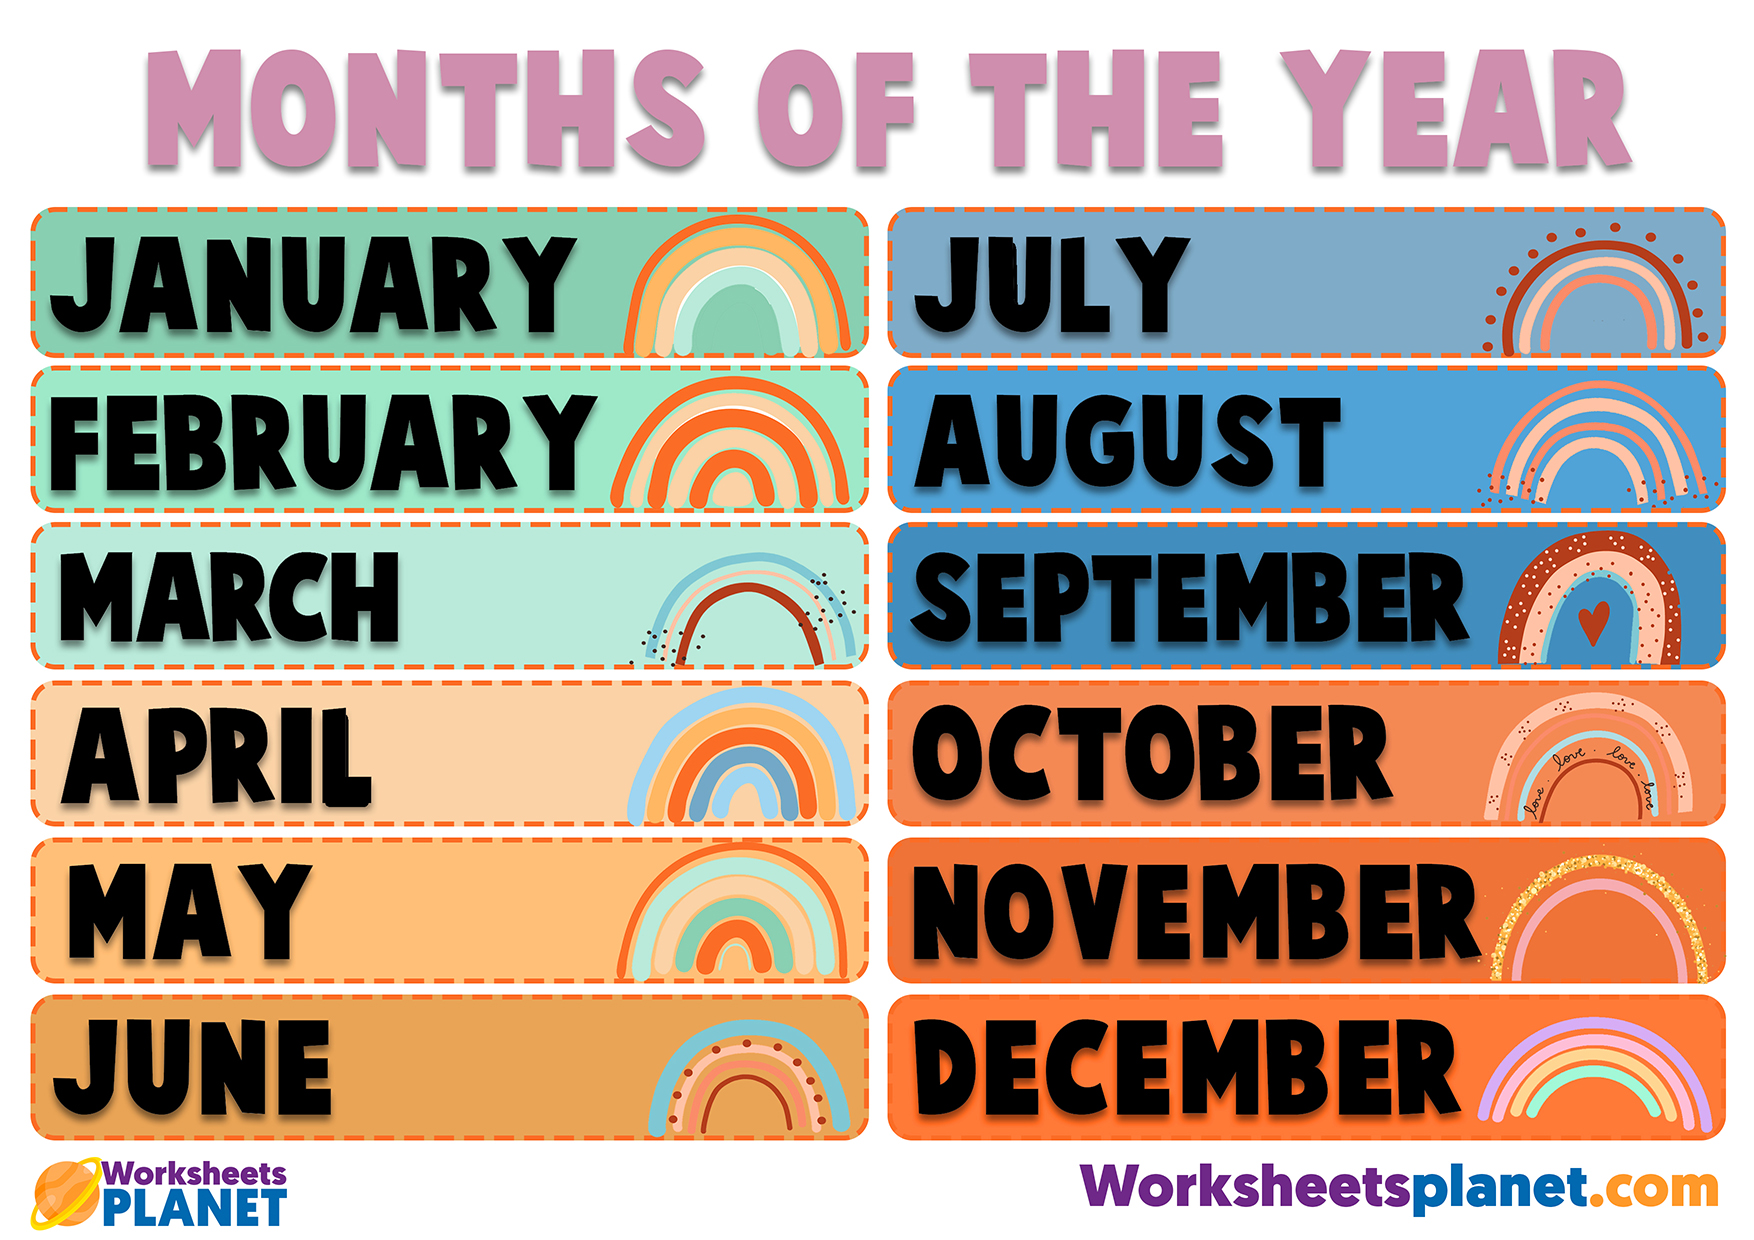 Months Of The Year Display Poster